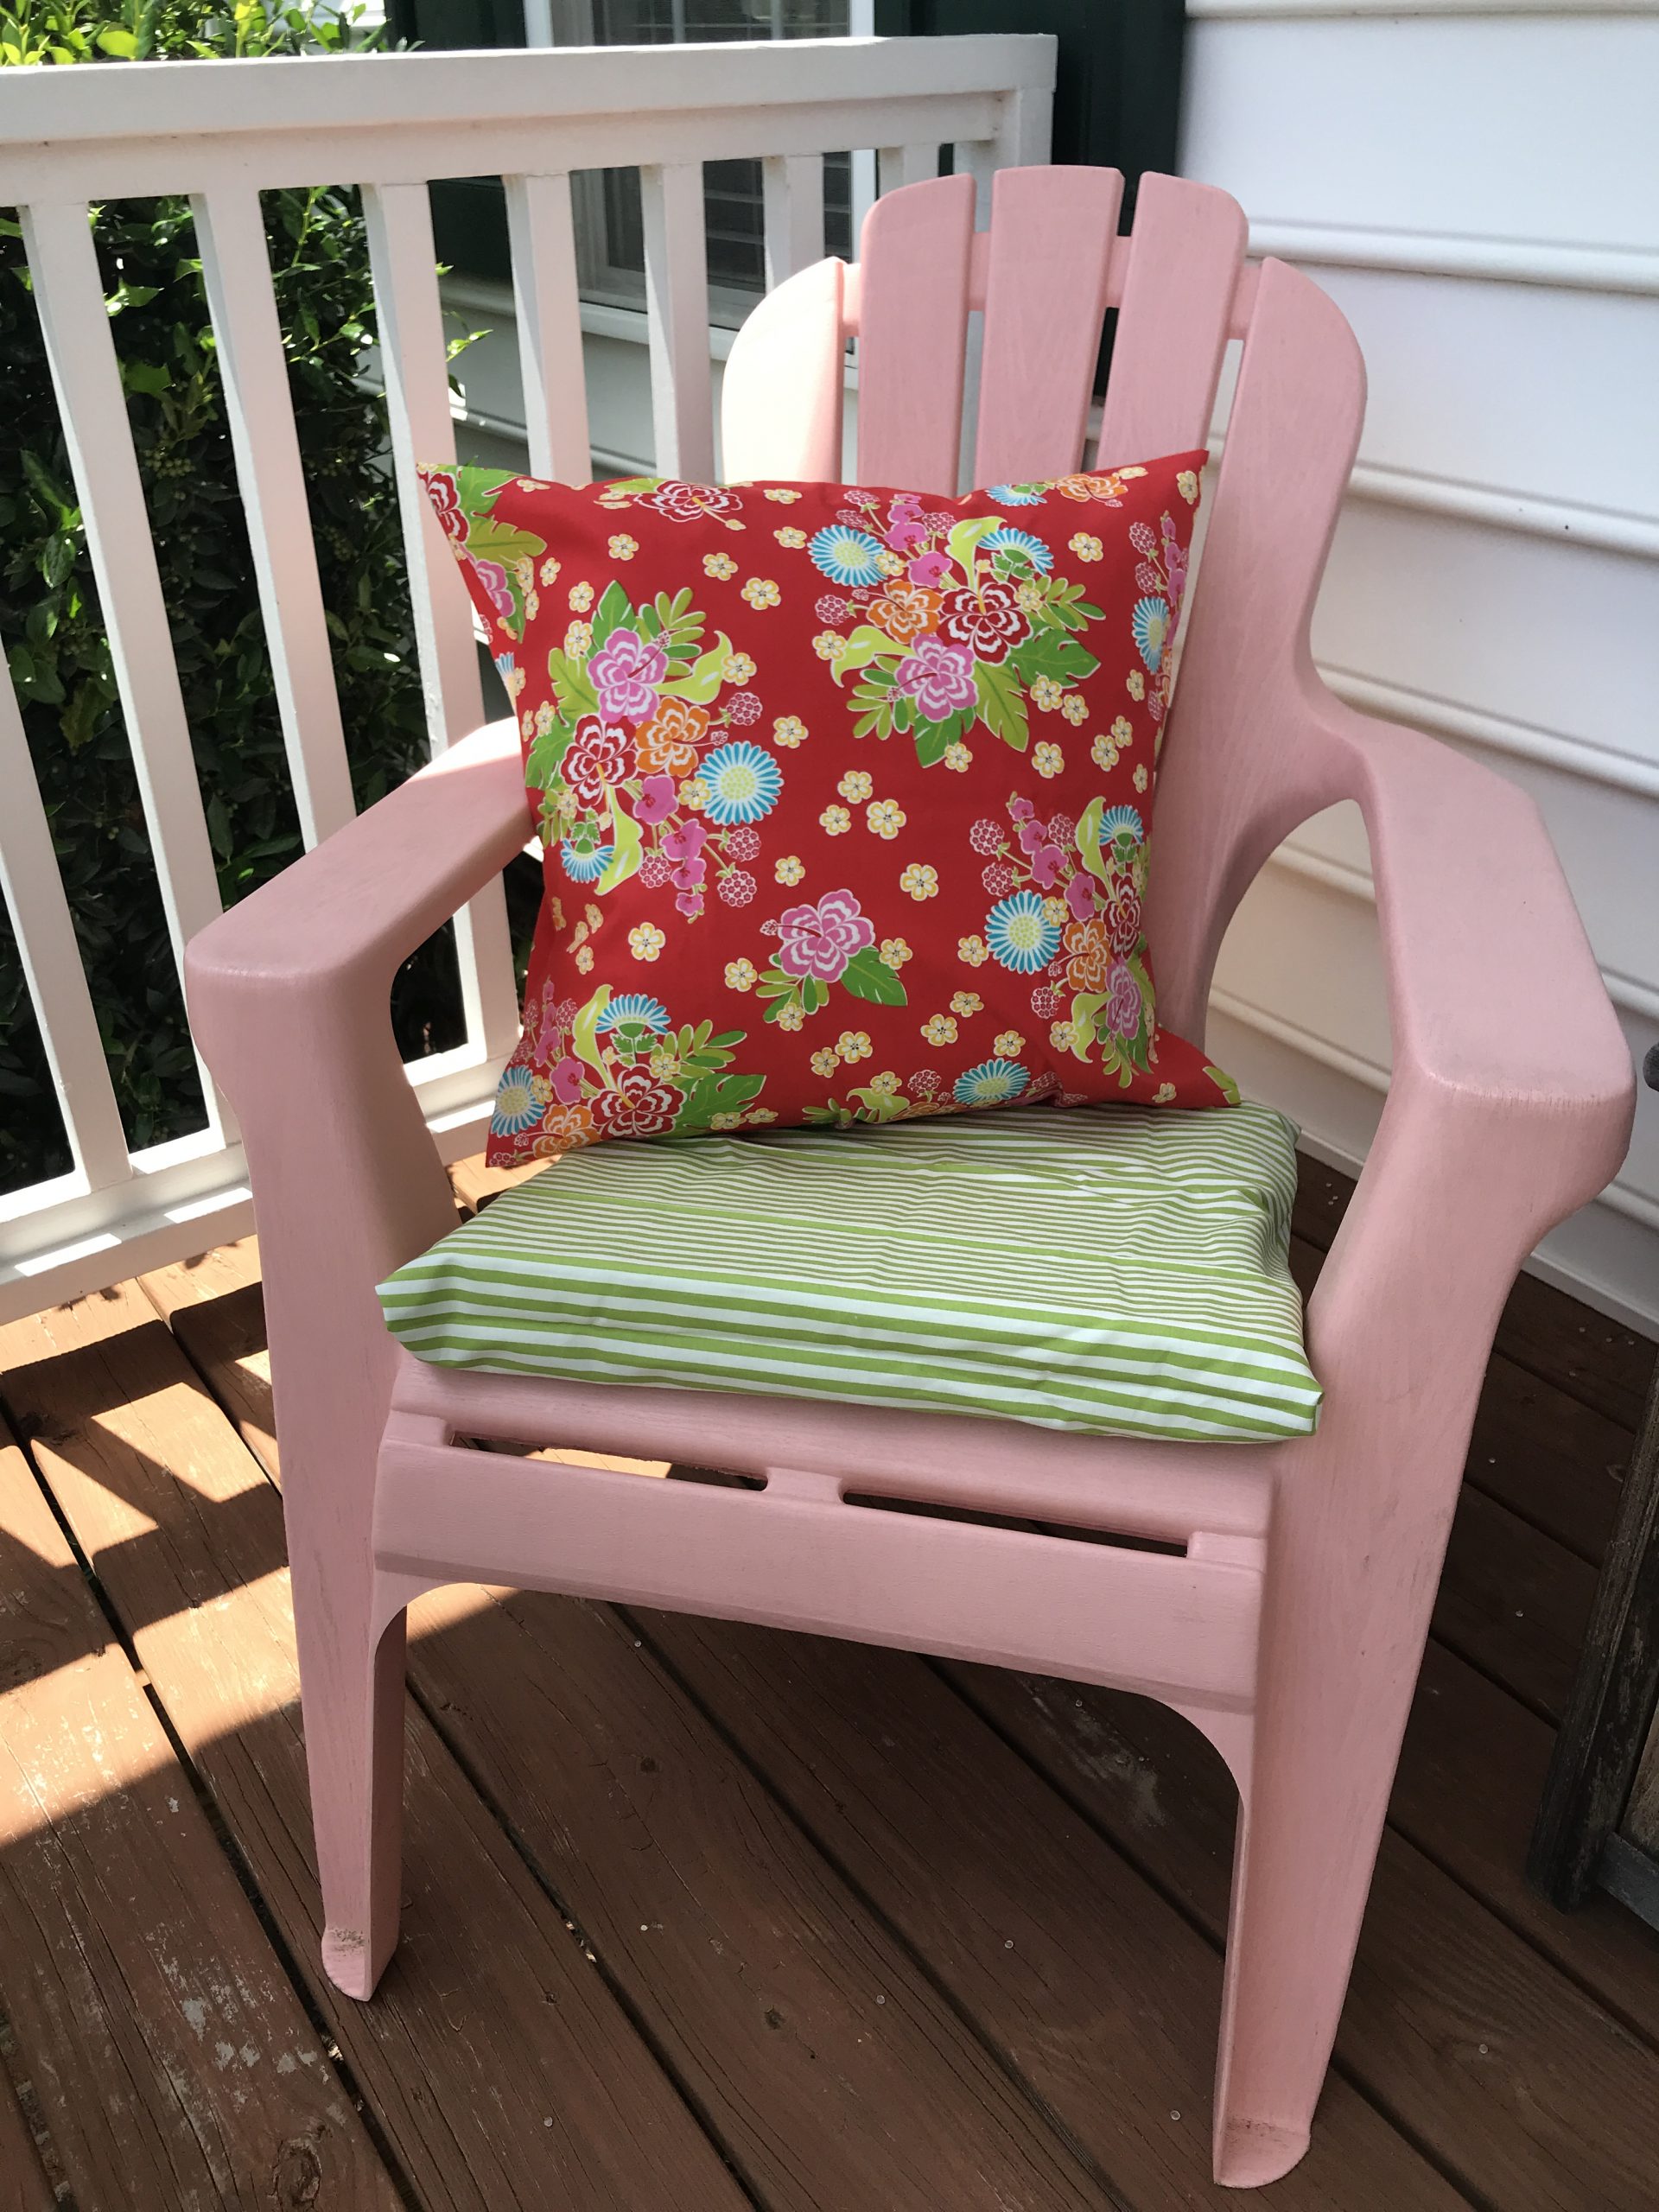 Chair with pillow and cushion | A Sweet Berry Designs Blog